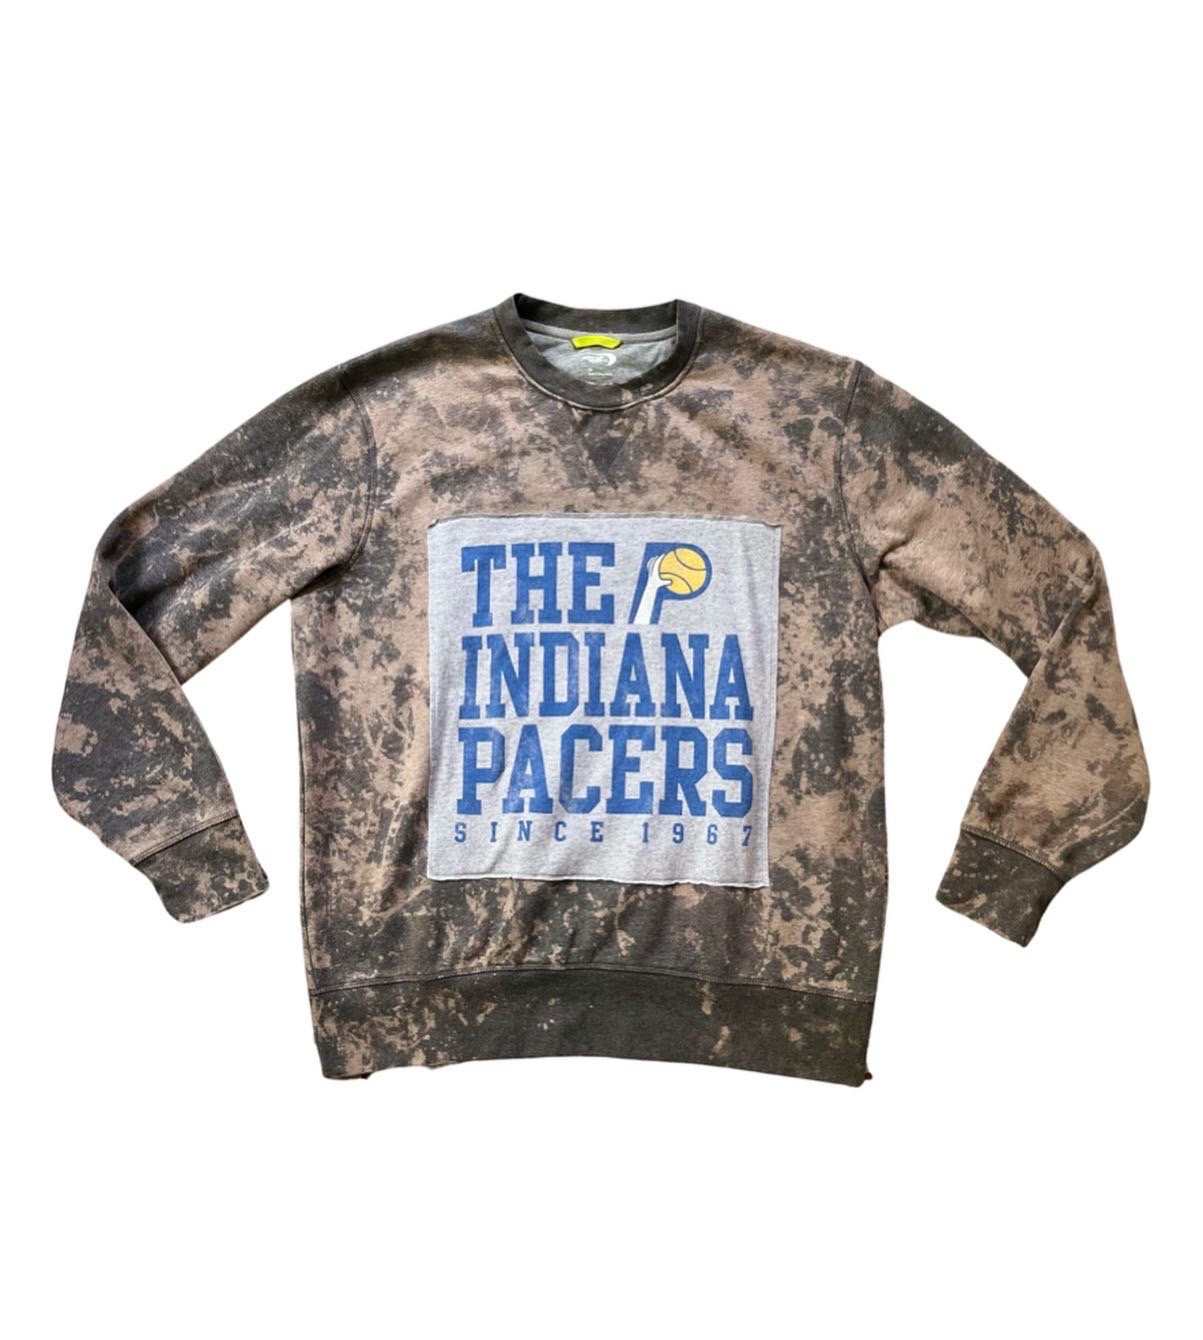 INDIANA PACERS Womens Sweatshirt Size Large Cross Front Roll Sleeve Cowl  Neck